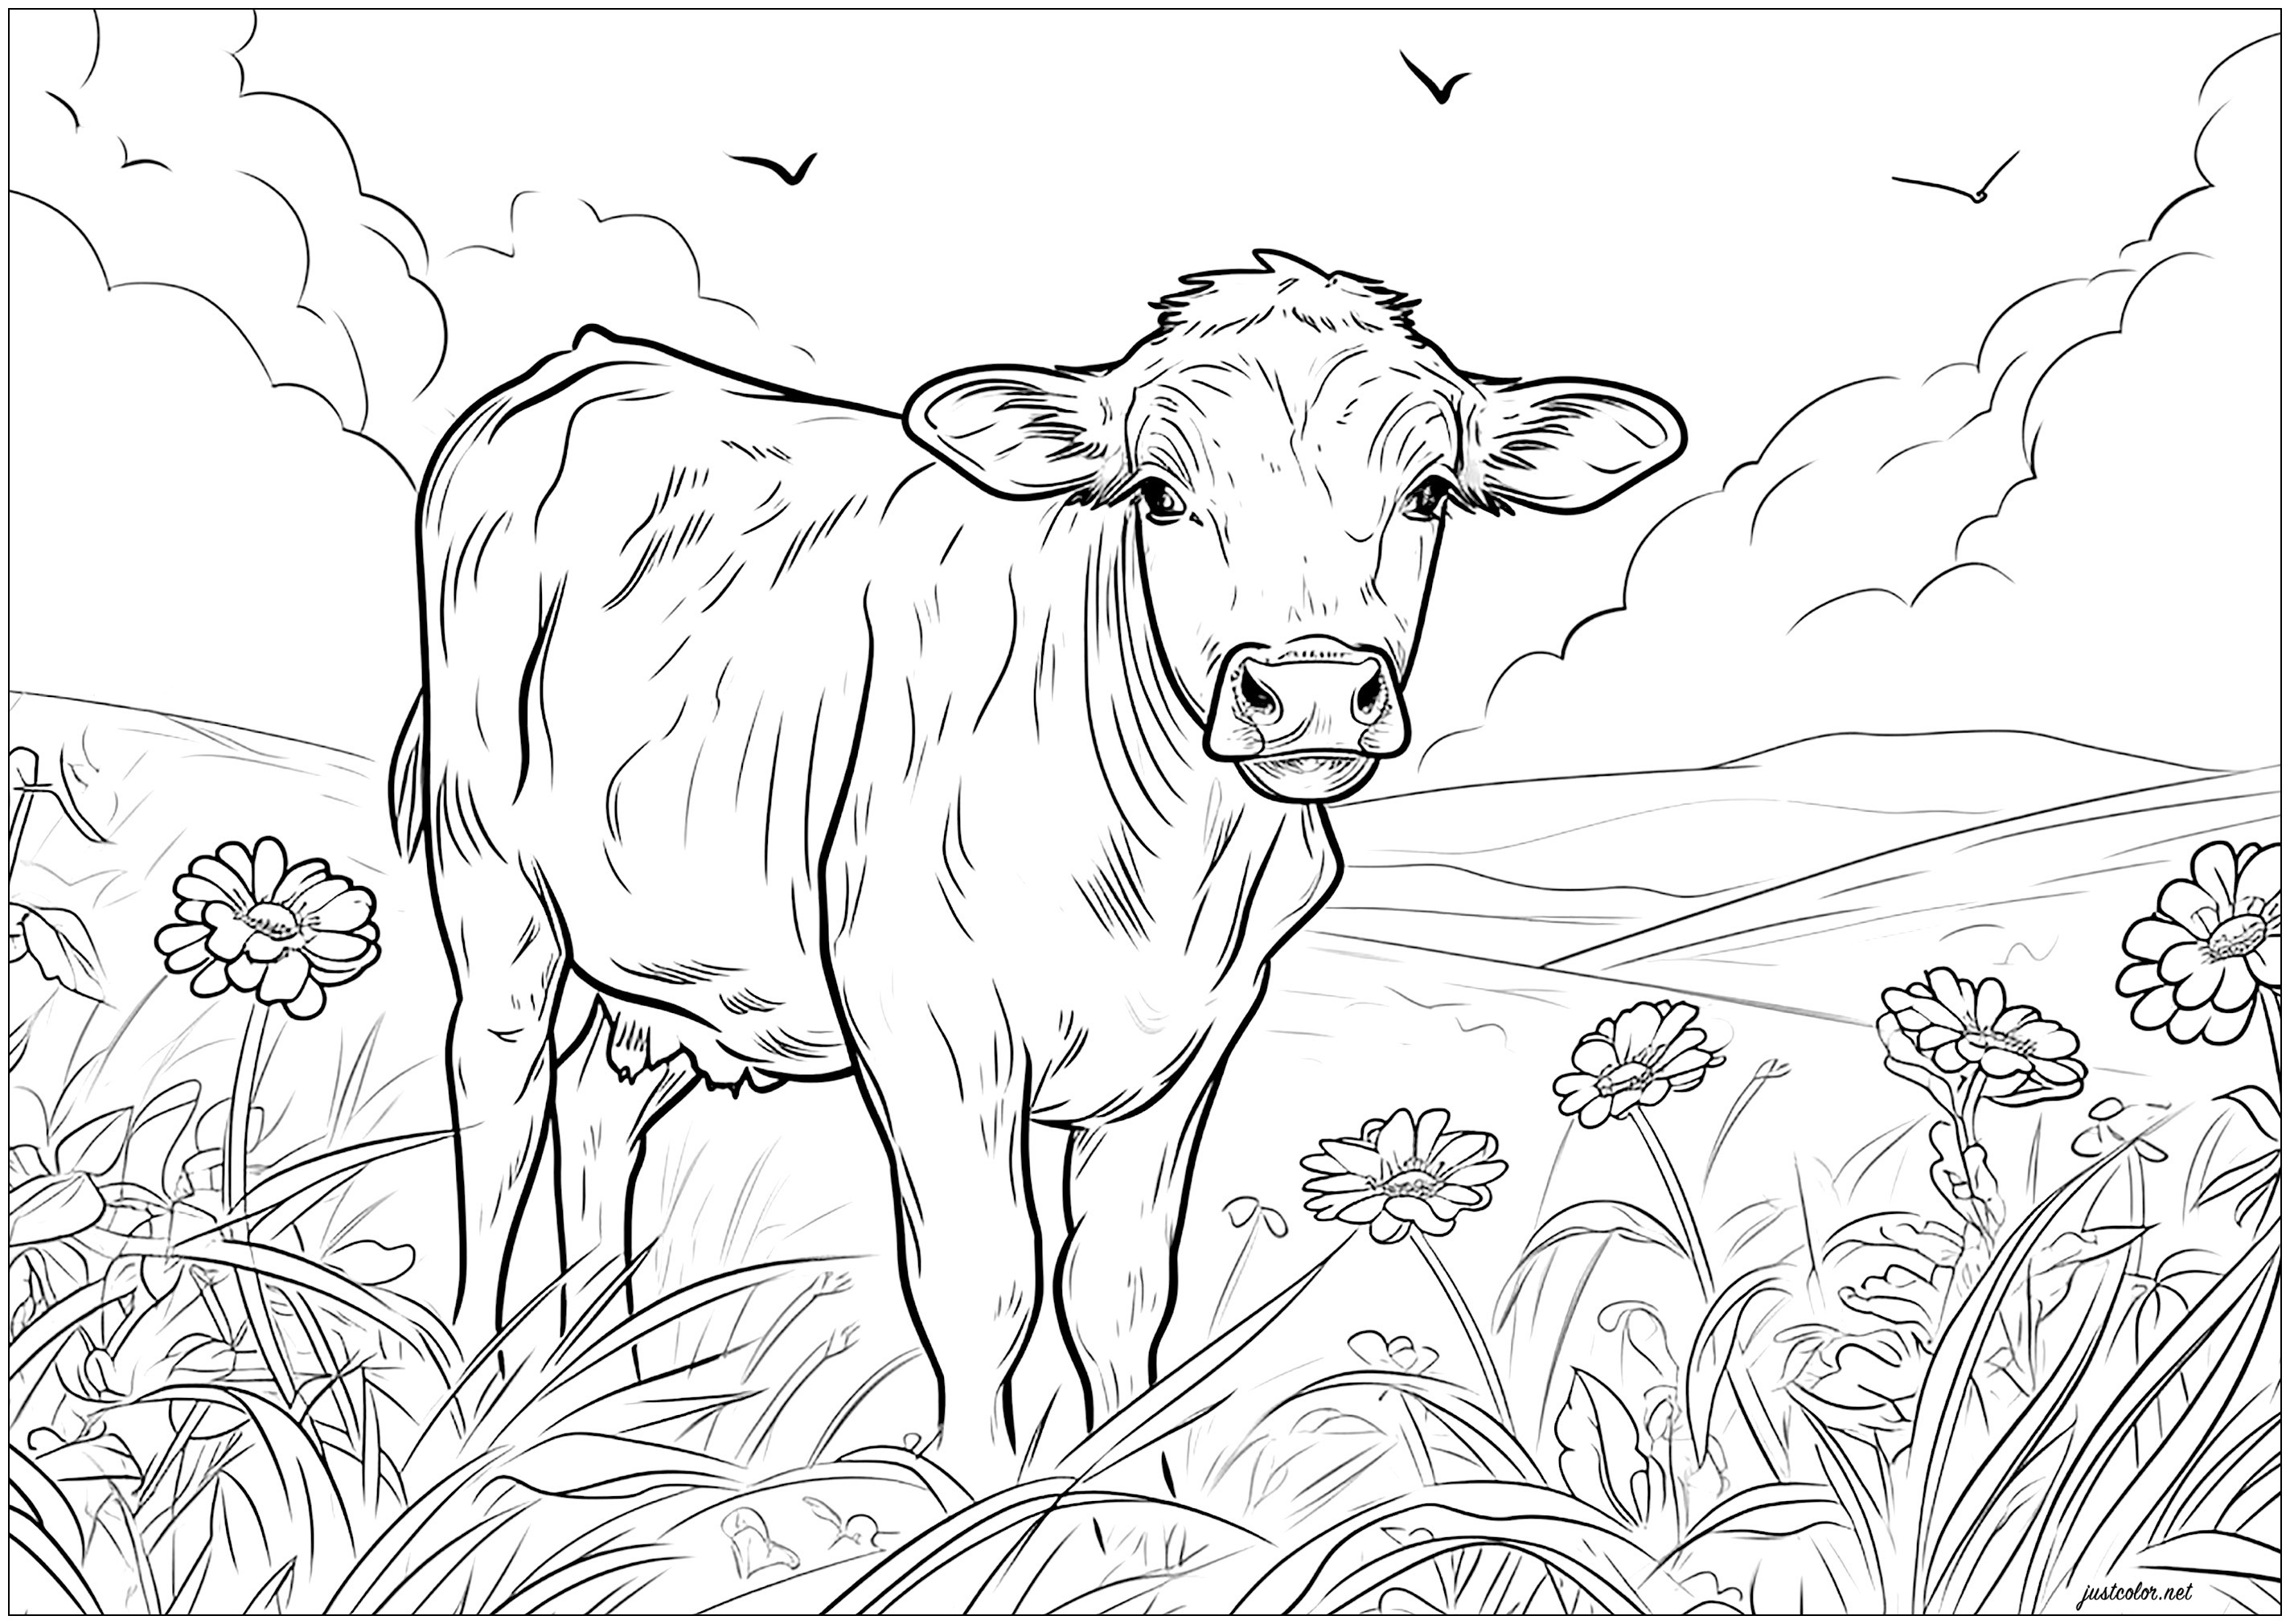 Cow in a field - 2 - Cows Adult Coloring Pages